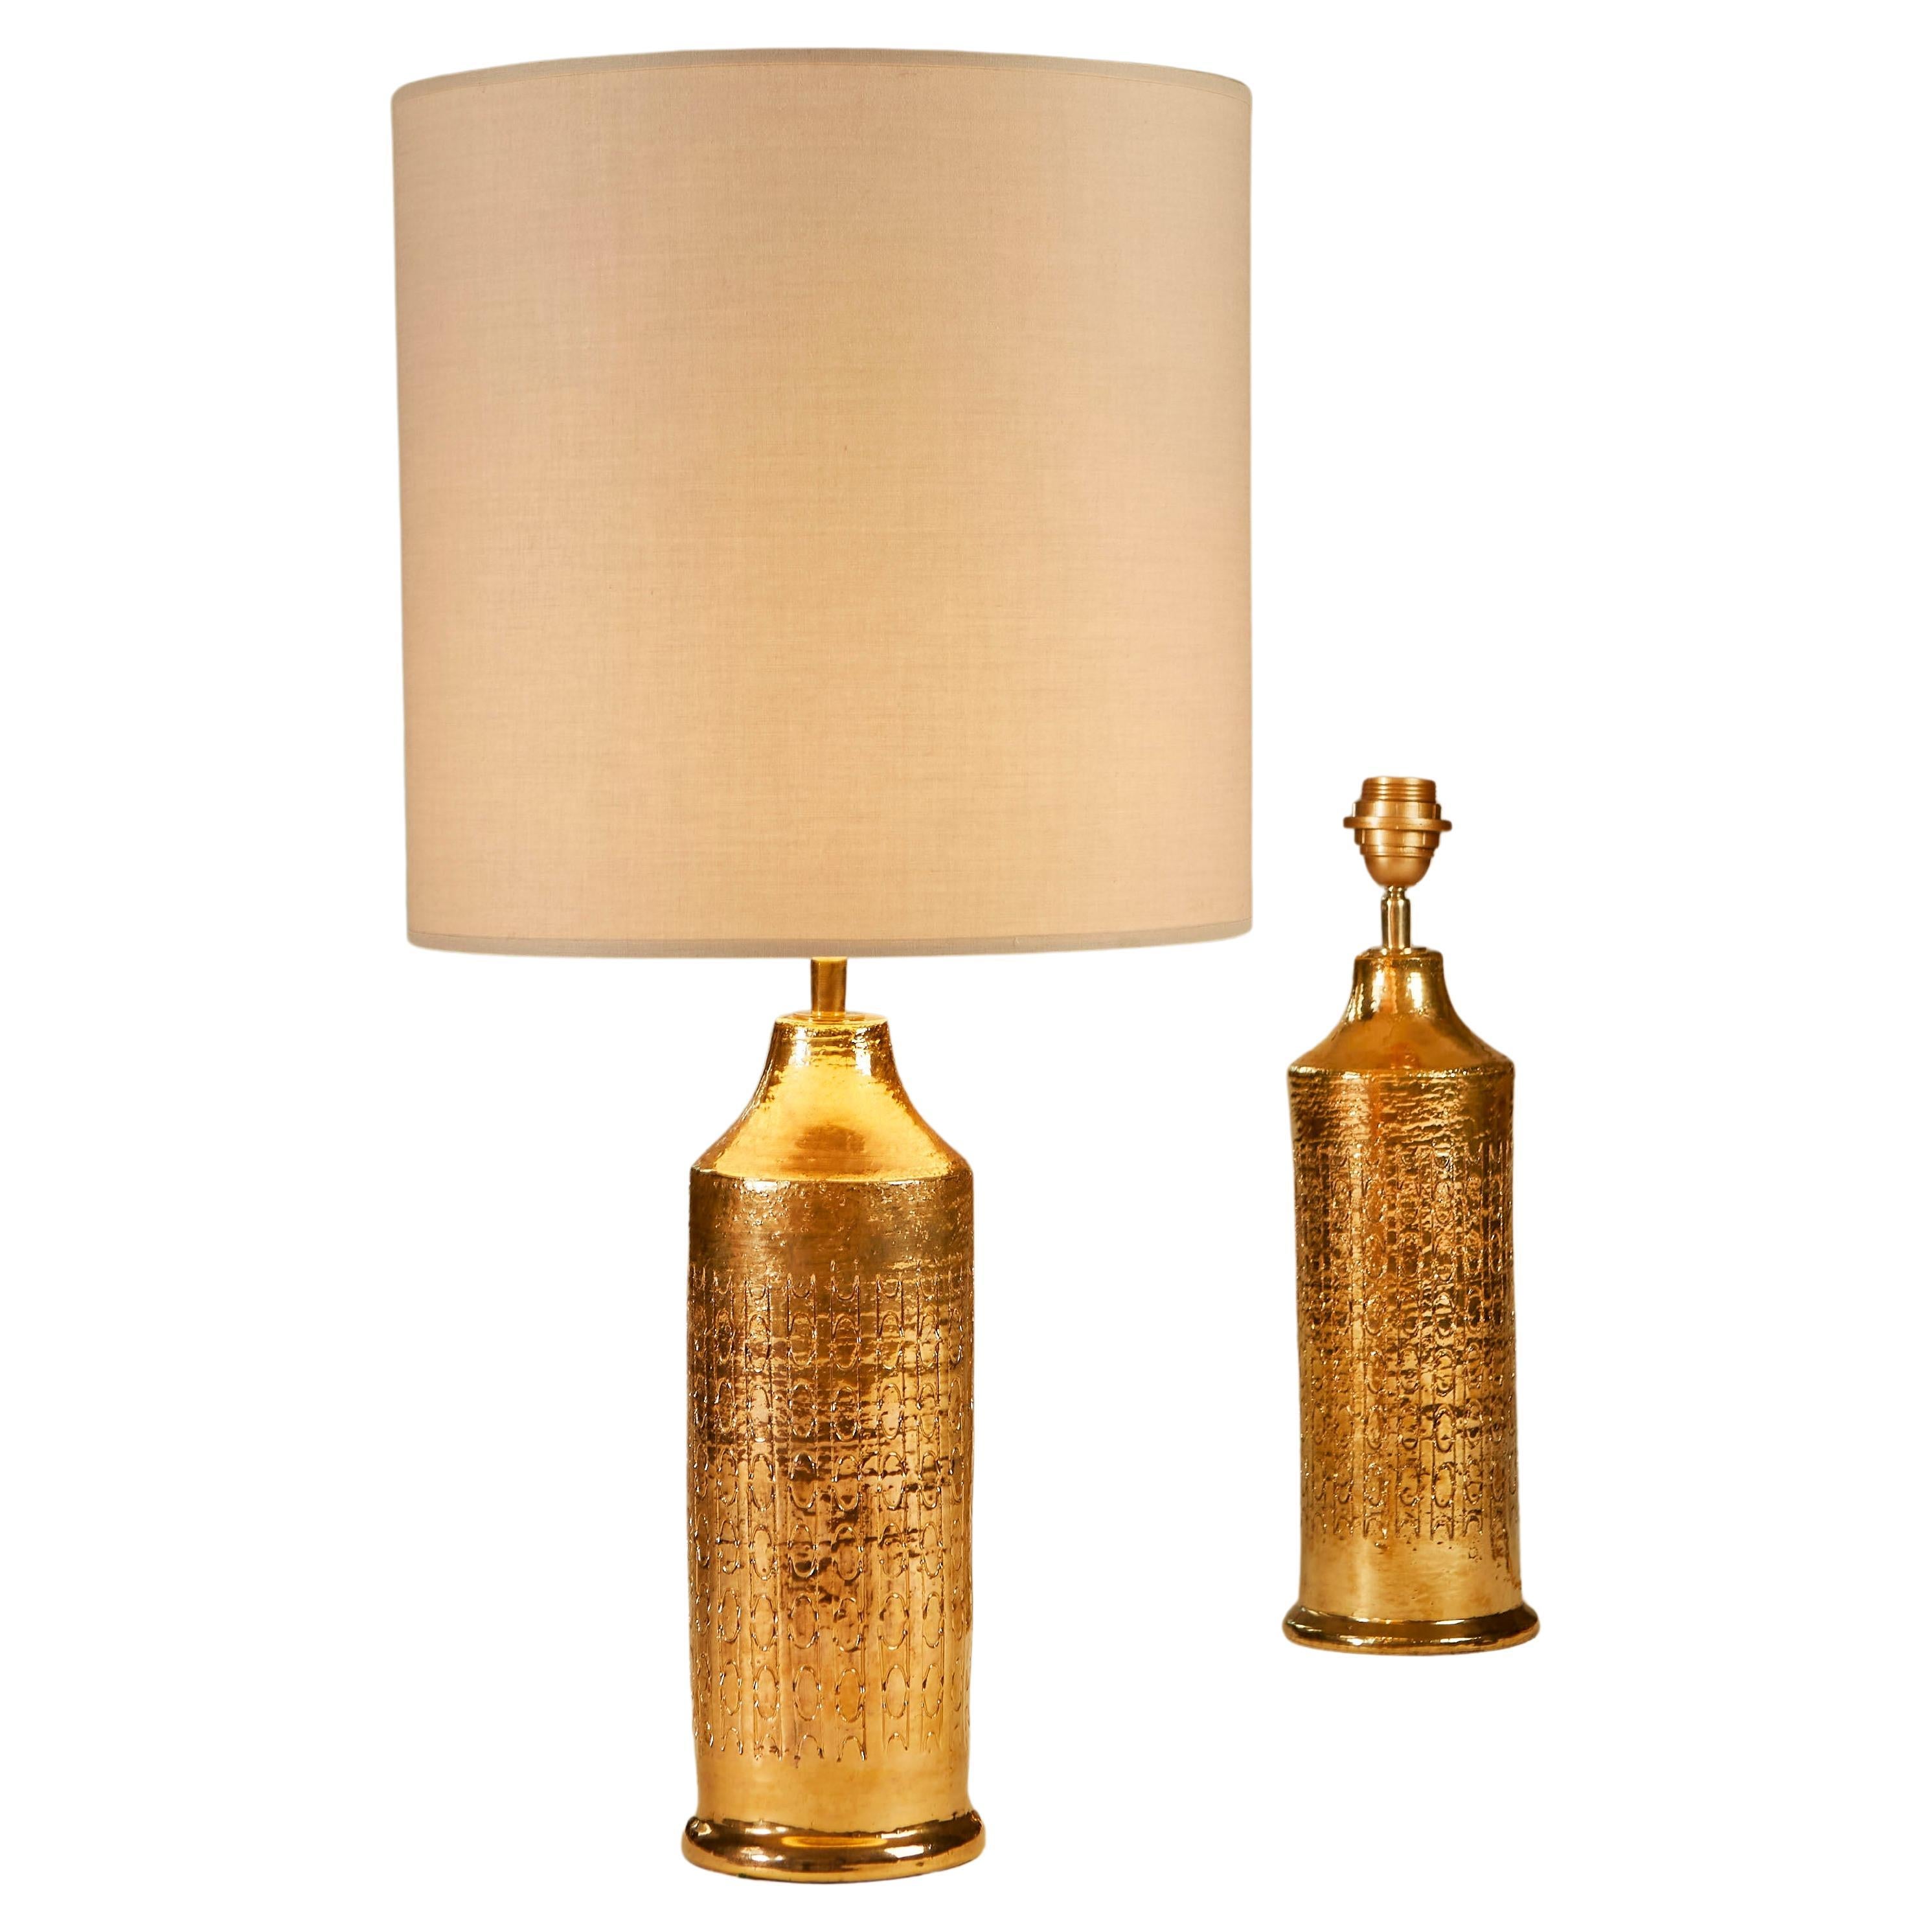 Pair of 1960s Swedish Gold Ceramic Table Lamps from Bitossi by Bergboms